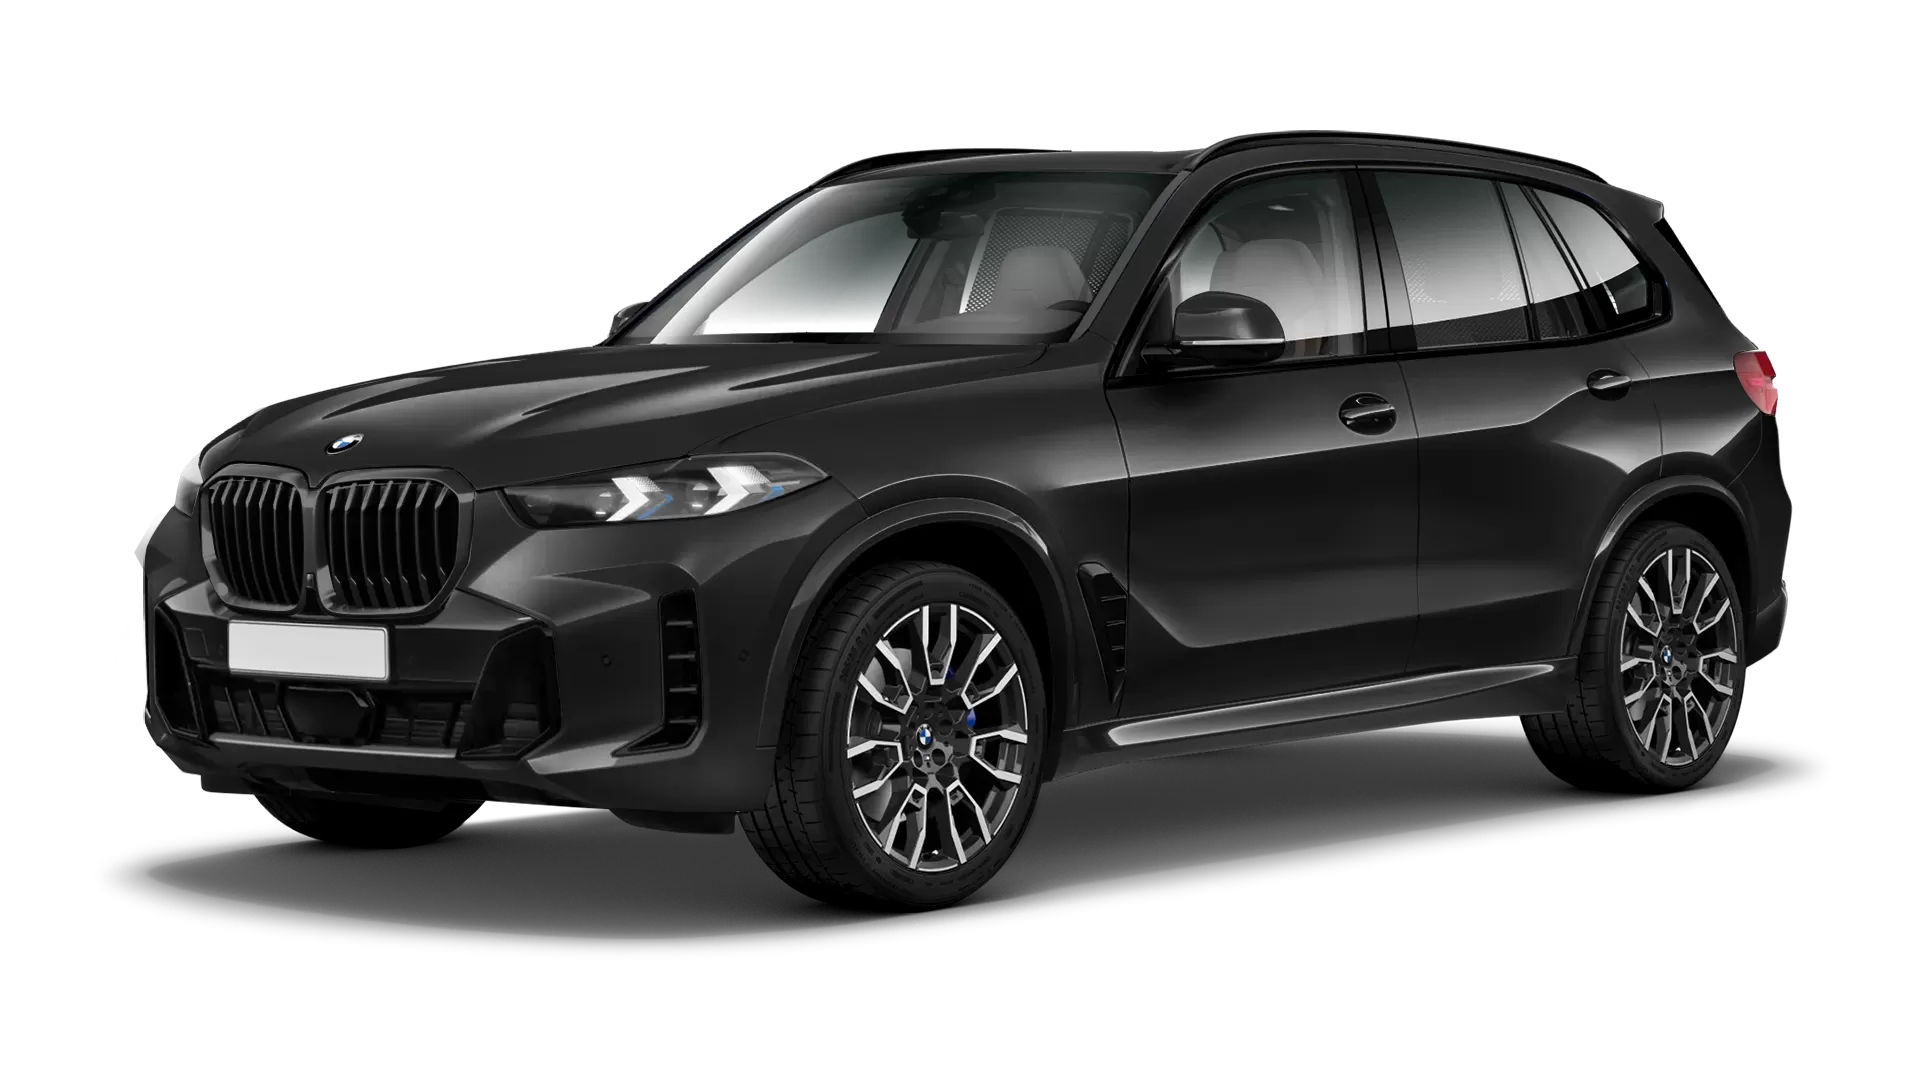 BMW X5 G05 LCI Facelift stock front view in Sapphire Black color